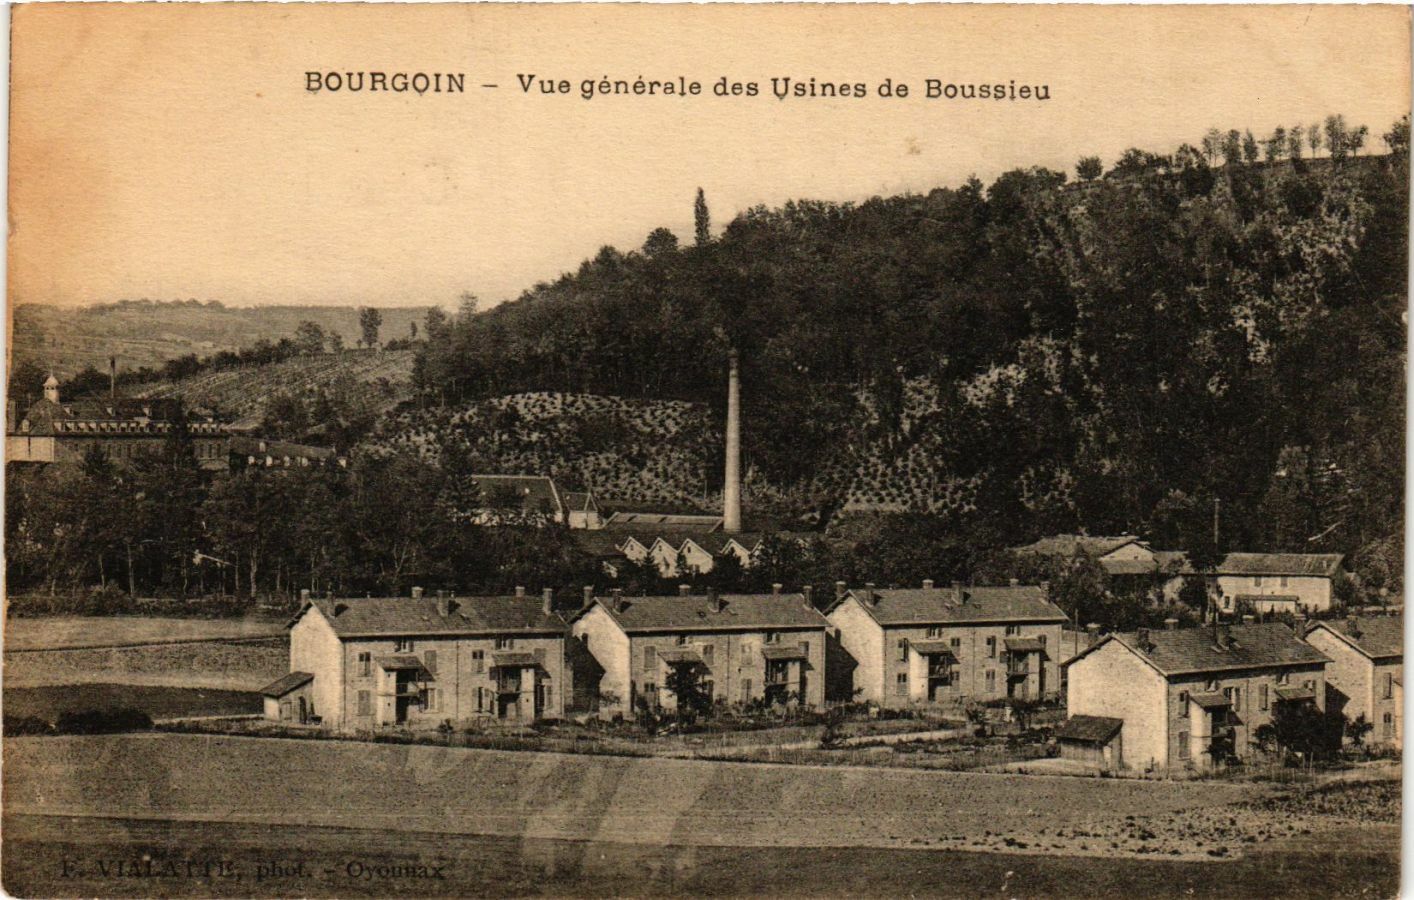 CPA Bourgoin - General view of the factories of Boussieu FRANCE (961731)